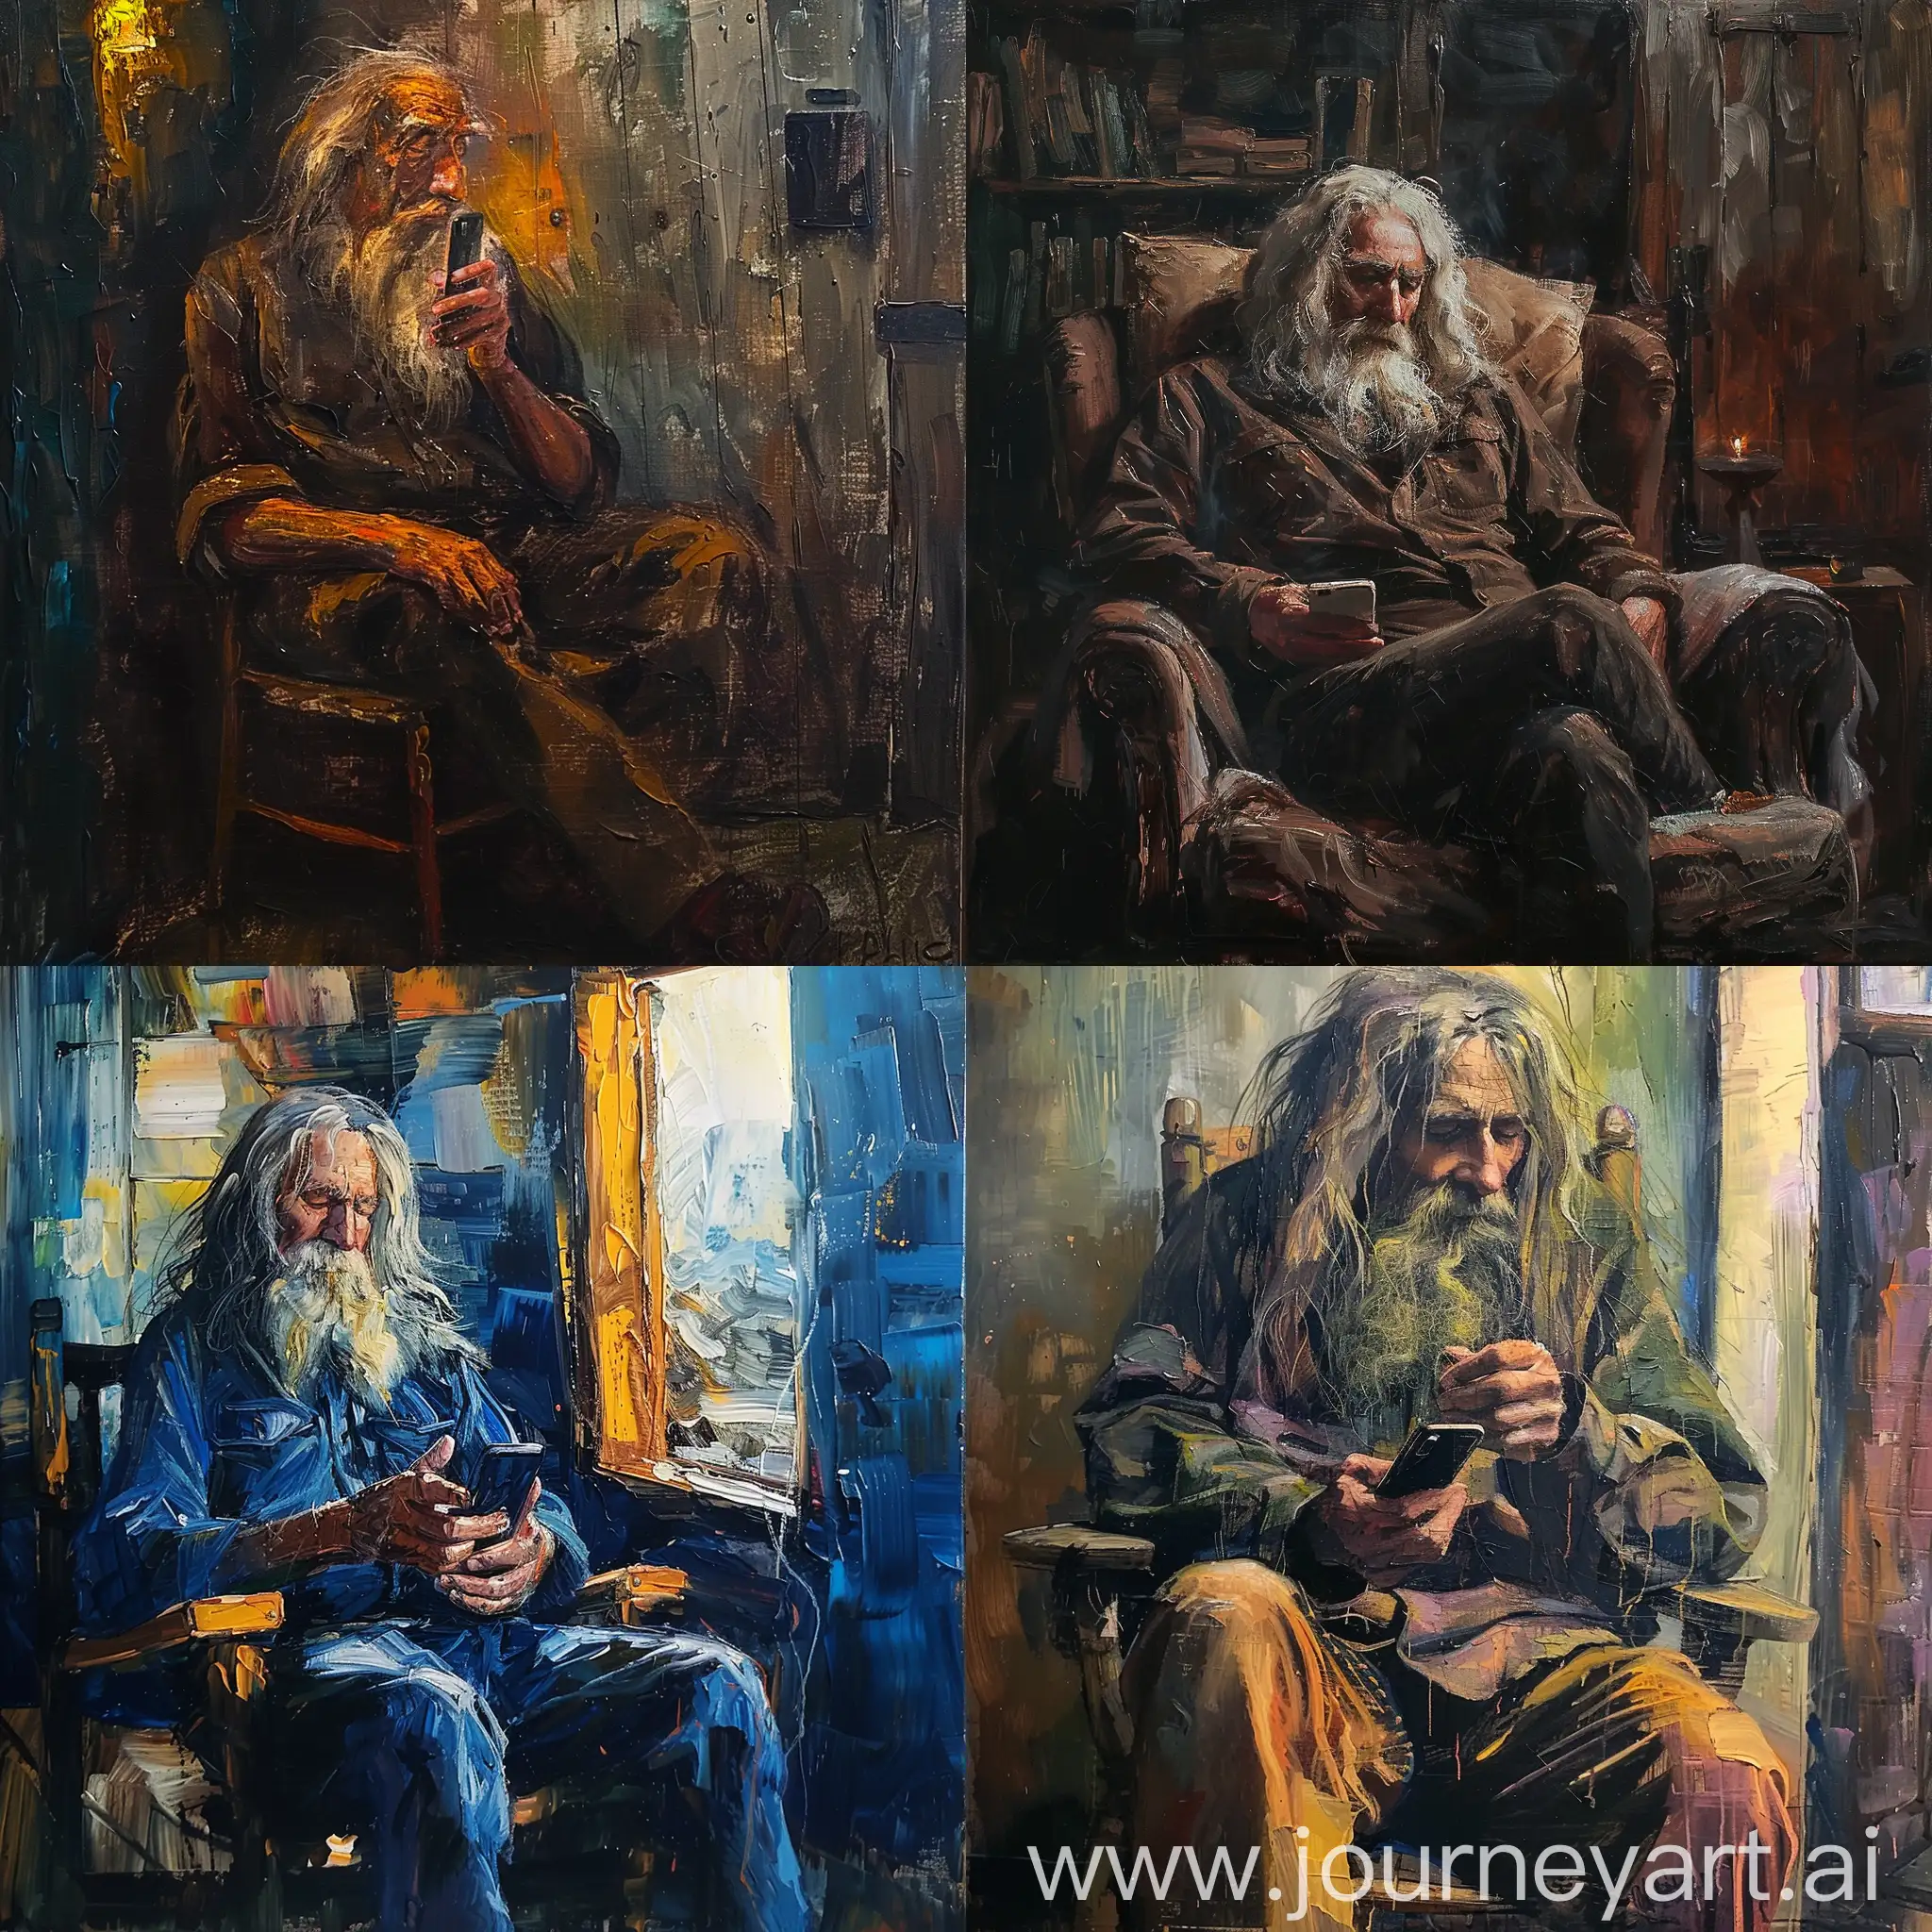 Elderly-Man-with-Long-Hair-and-Beard-Sitting-in-Cabin-with-Phone-Abstract-Painting